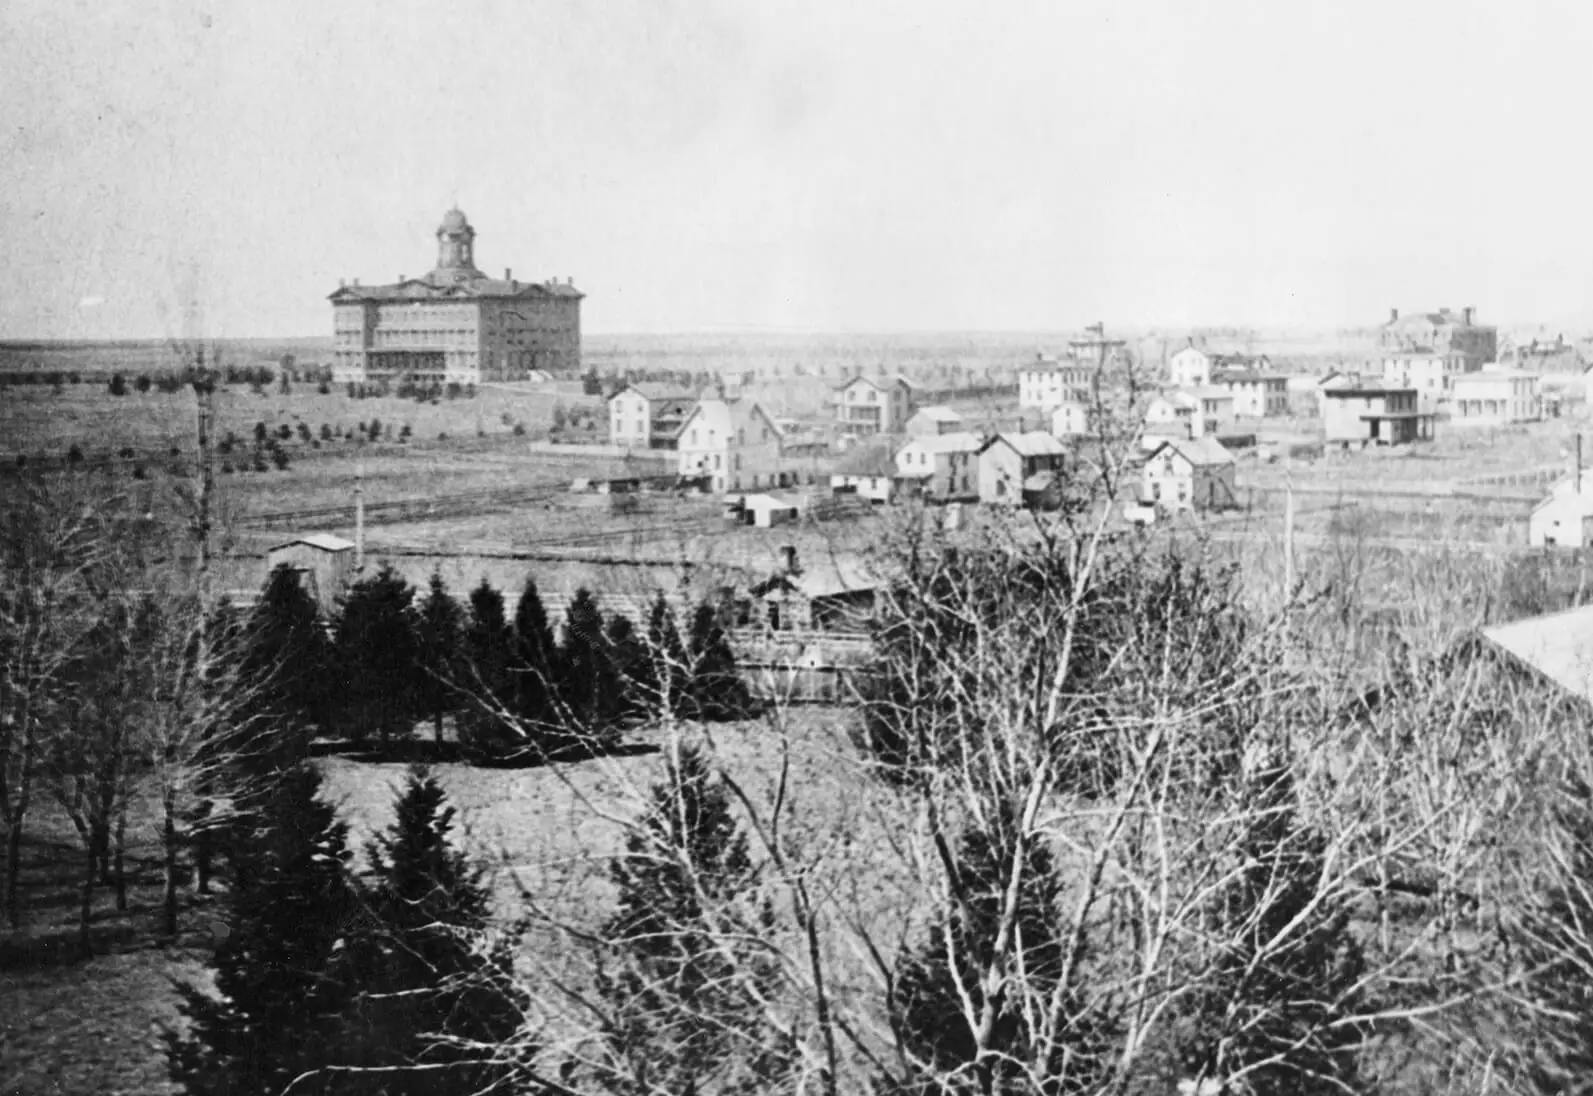 This black and white photograph shows Black and white photo of a large multi-story building in the distance and smaller structures in the surrounding area. Many trees are in the foreground.